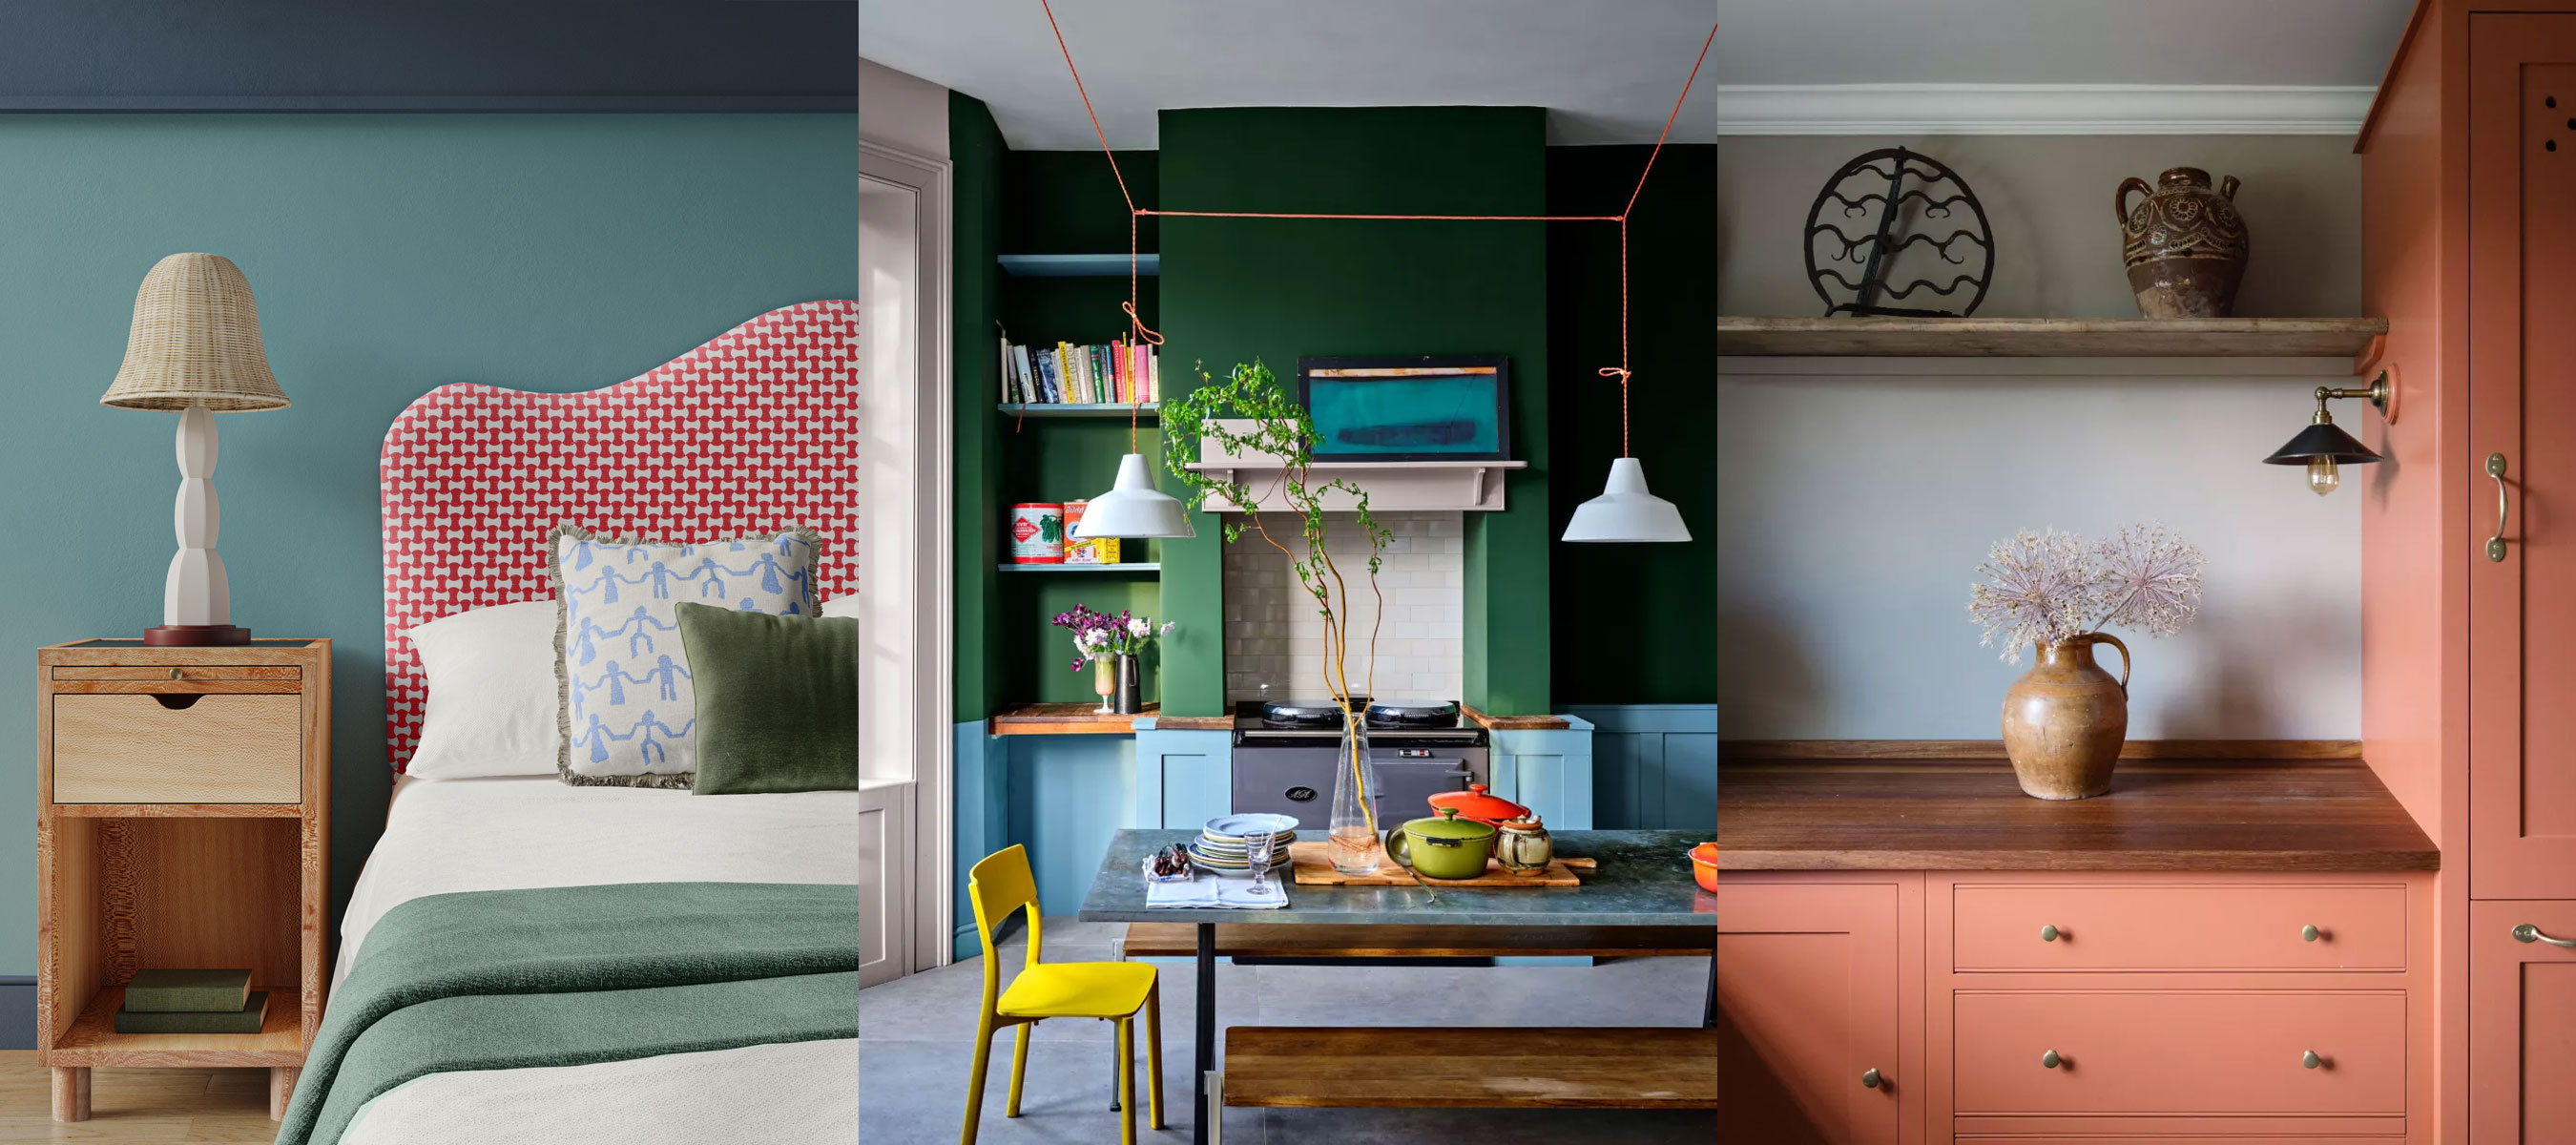 Paint Colours Chart - 30 On-Trend Paint Colours For Every Room